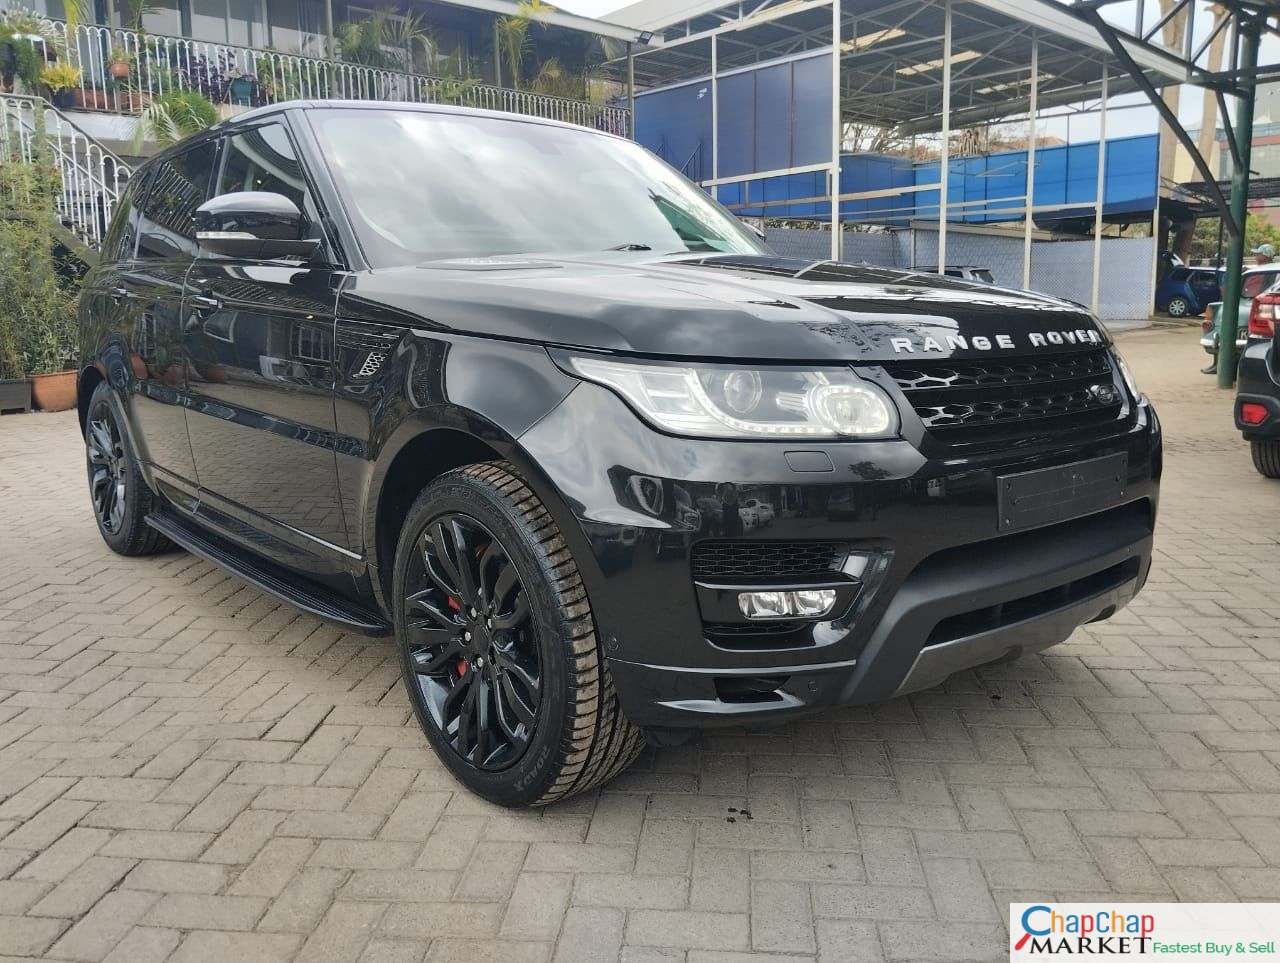 Range Rover Sport for sale in Kenya  AUTOBIOGRAPHY You pay 30% deposit Trade in OK EXCLUSIVE hire purchase installments